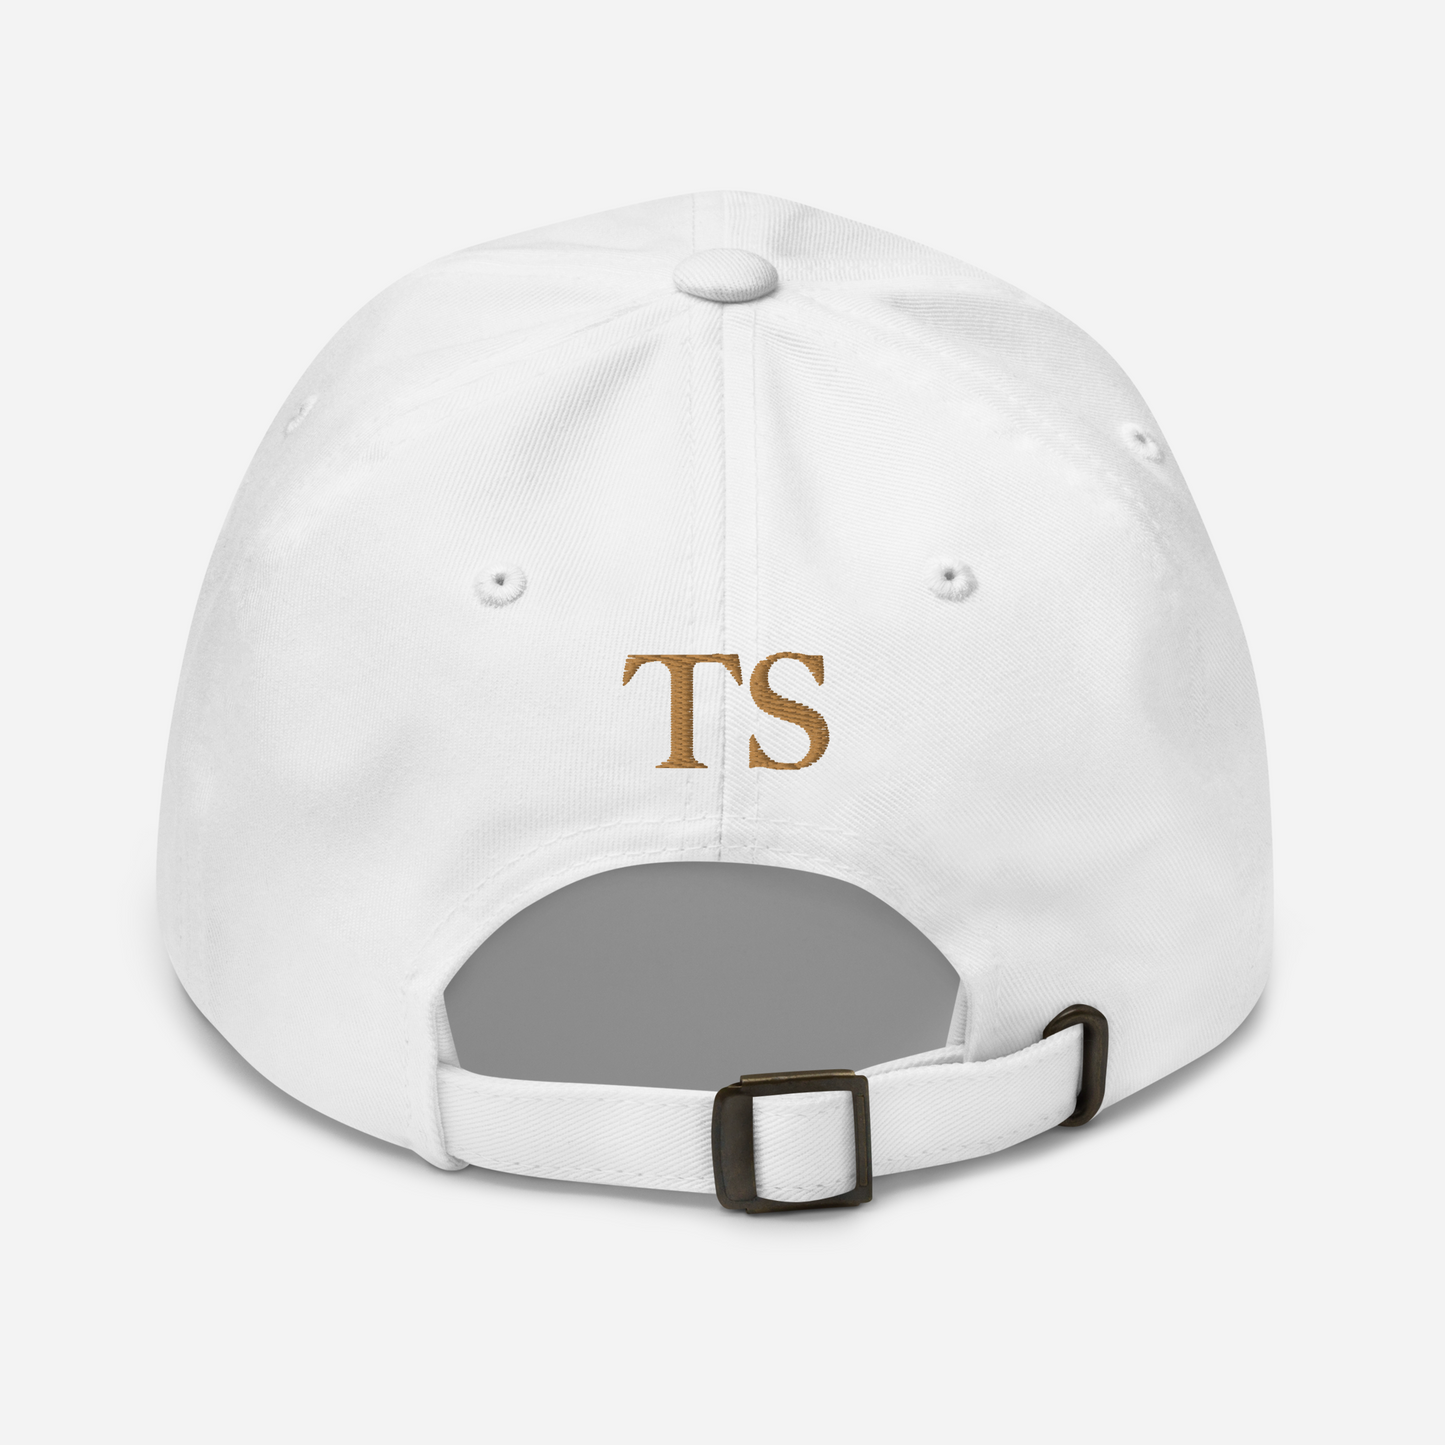 TTPD - Embroidered Dad Cap